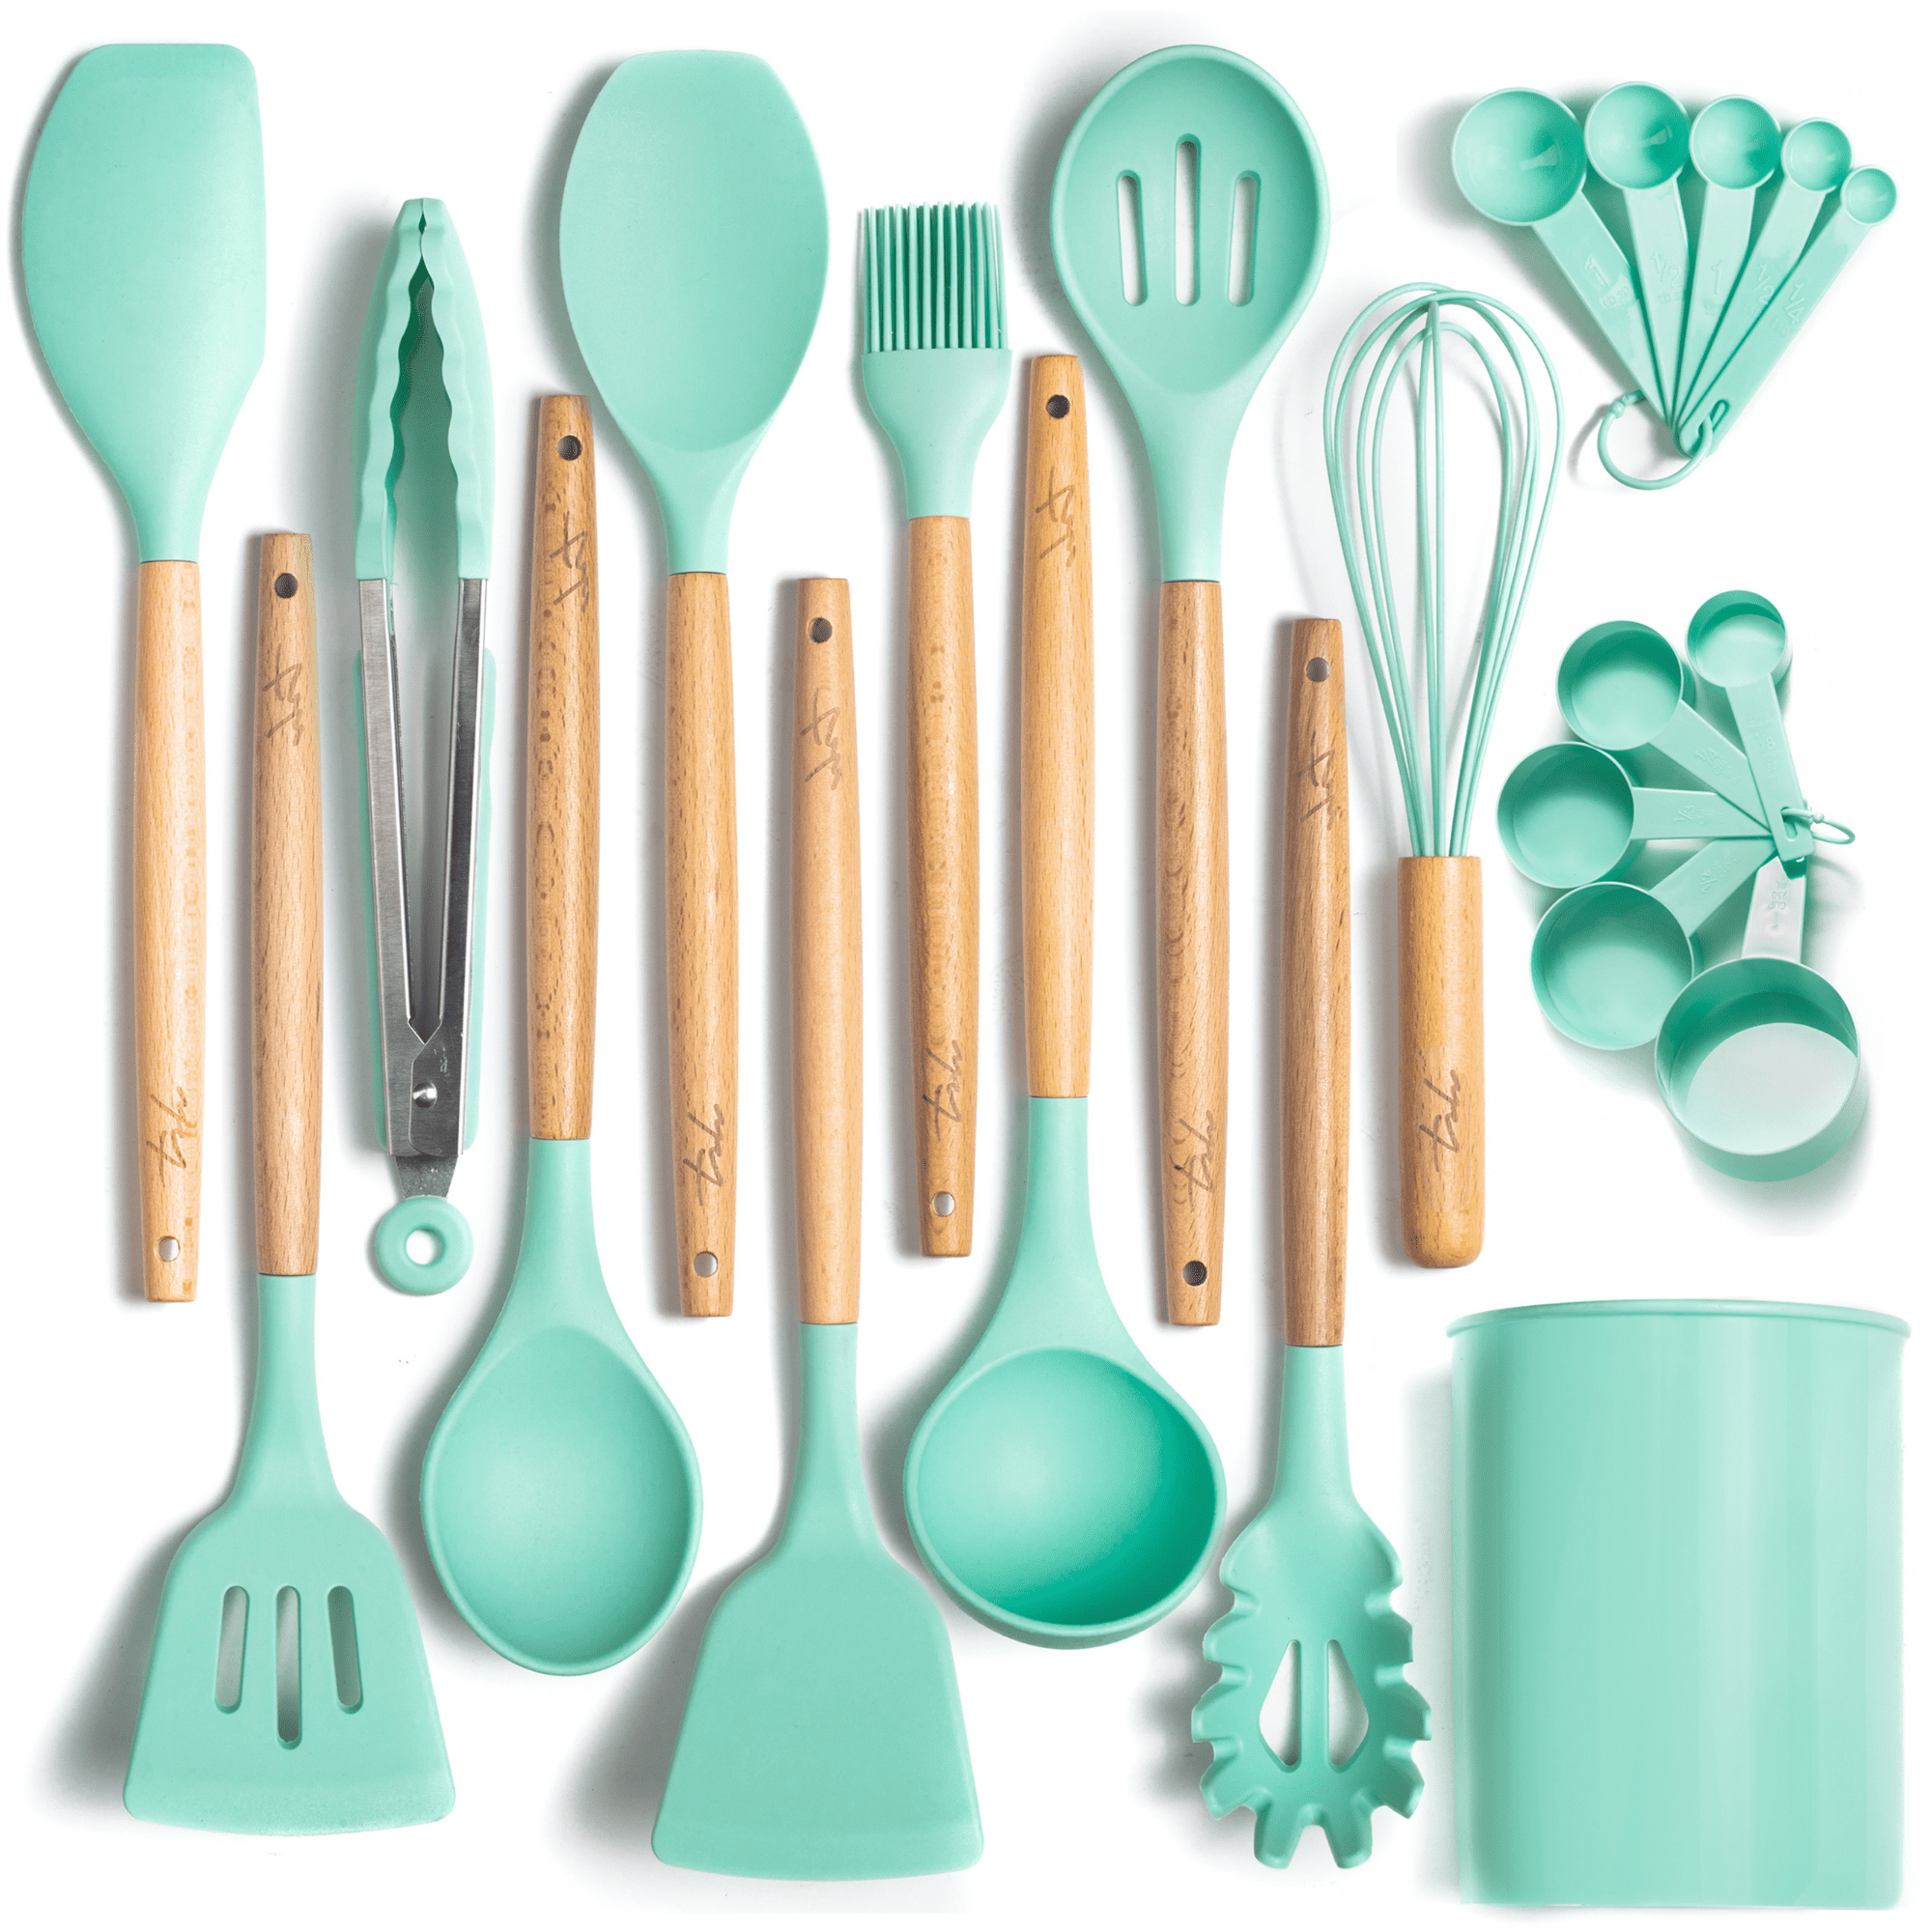 Three-Sixty Home ODORLESS 13 Pc Silicone Cooking Utensils Set with